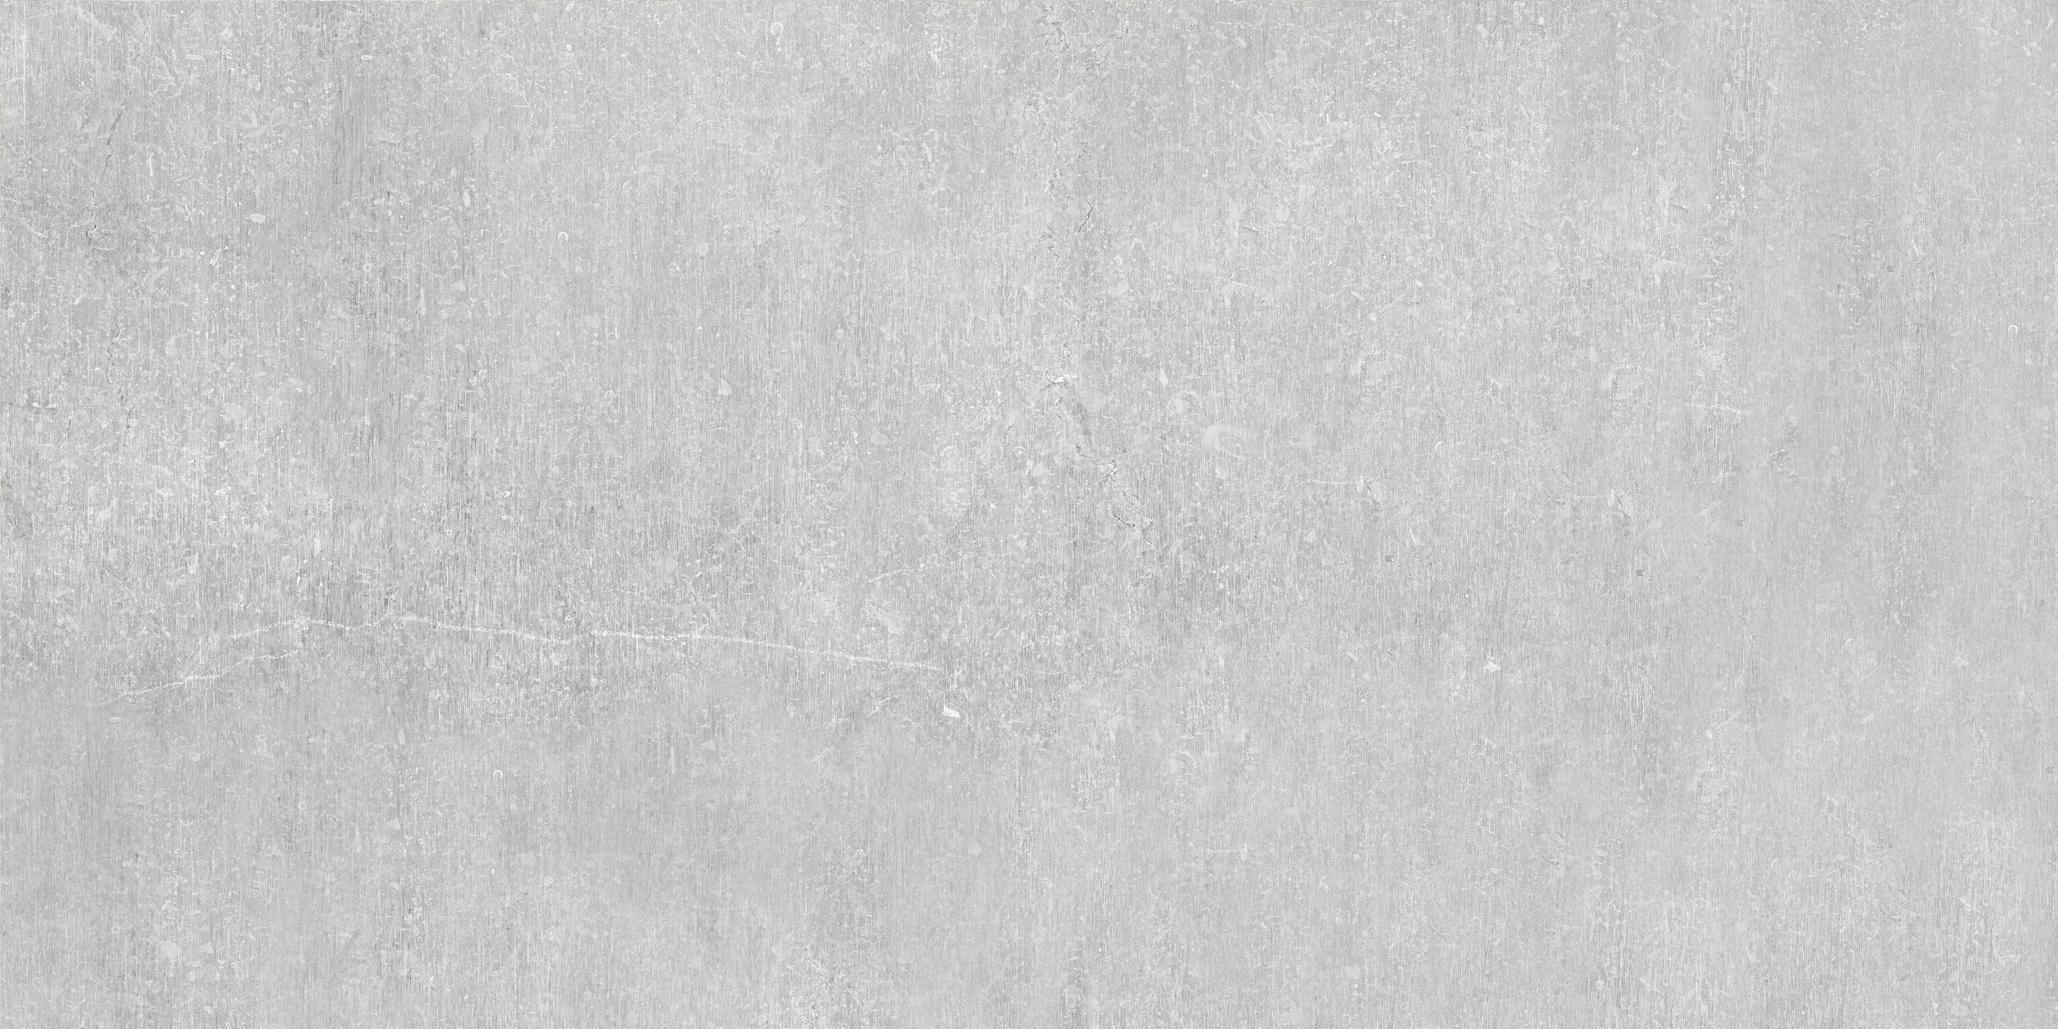 ice pattern glazed porcelain field tile from nexus anatolia collection distributed by surface group international matte finish pressed edge 16x32 rectangle shape